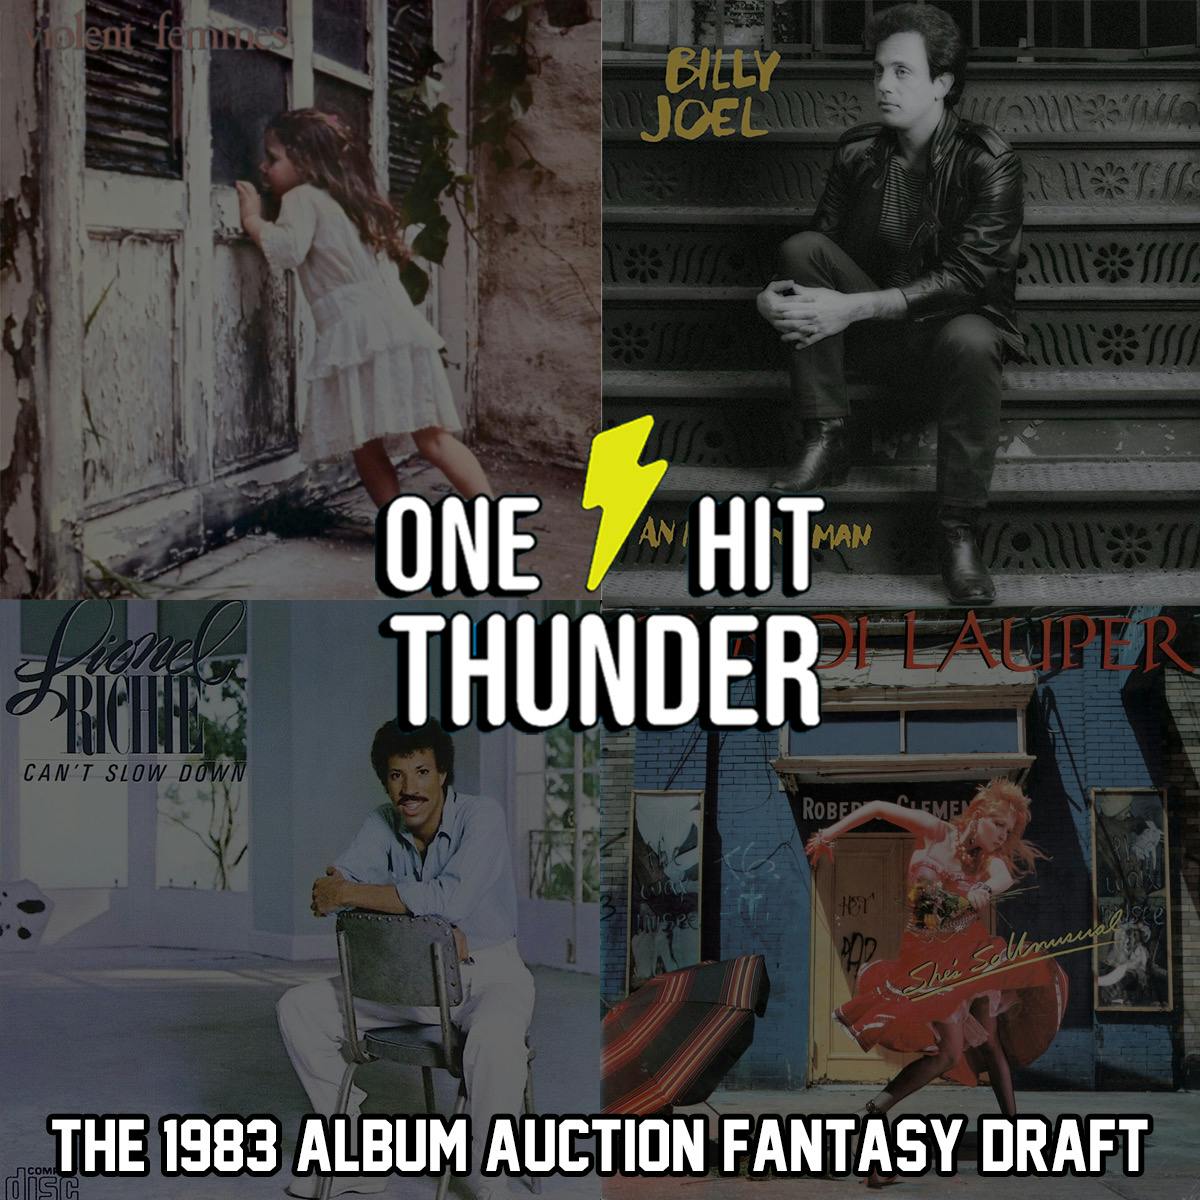 The 1983 Albums Fantasy Auction Draft